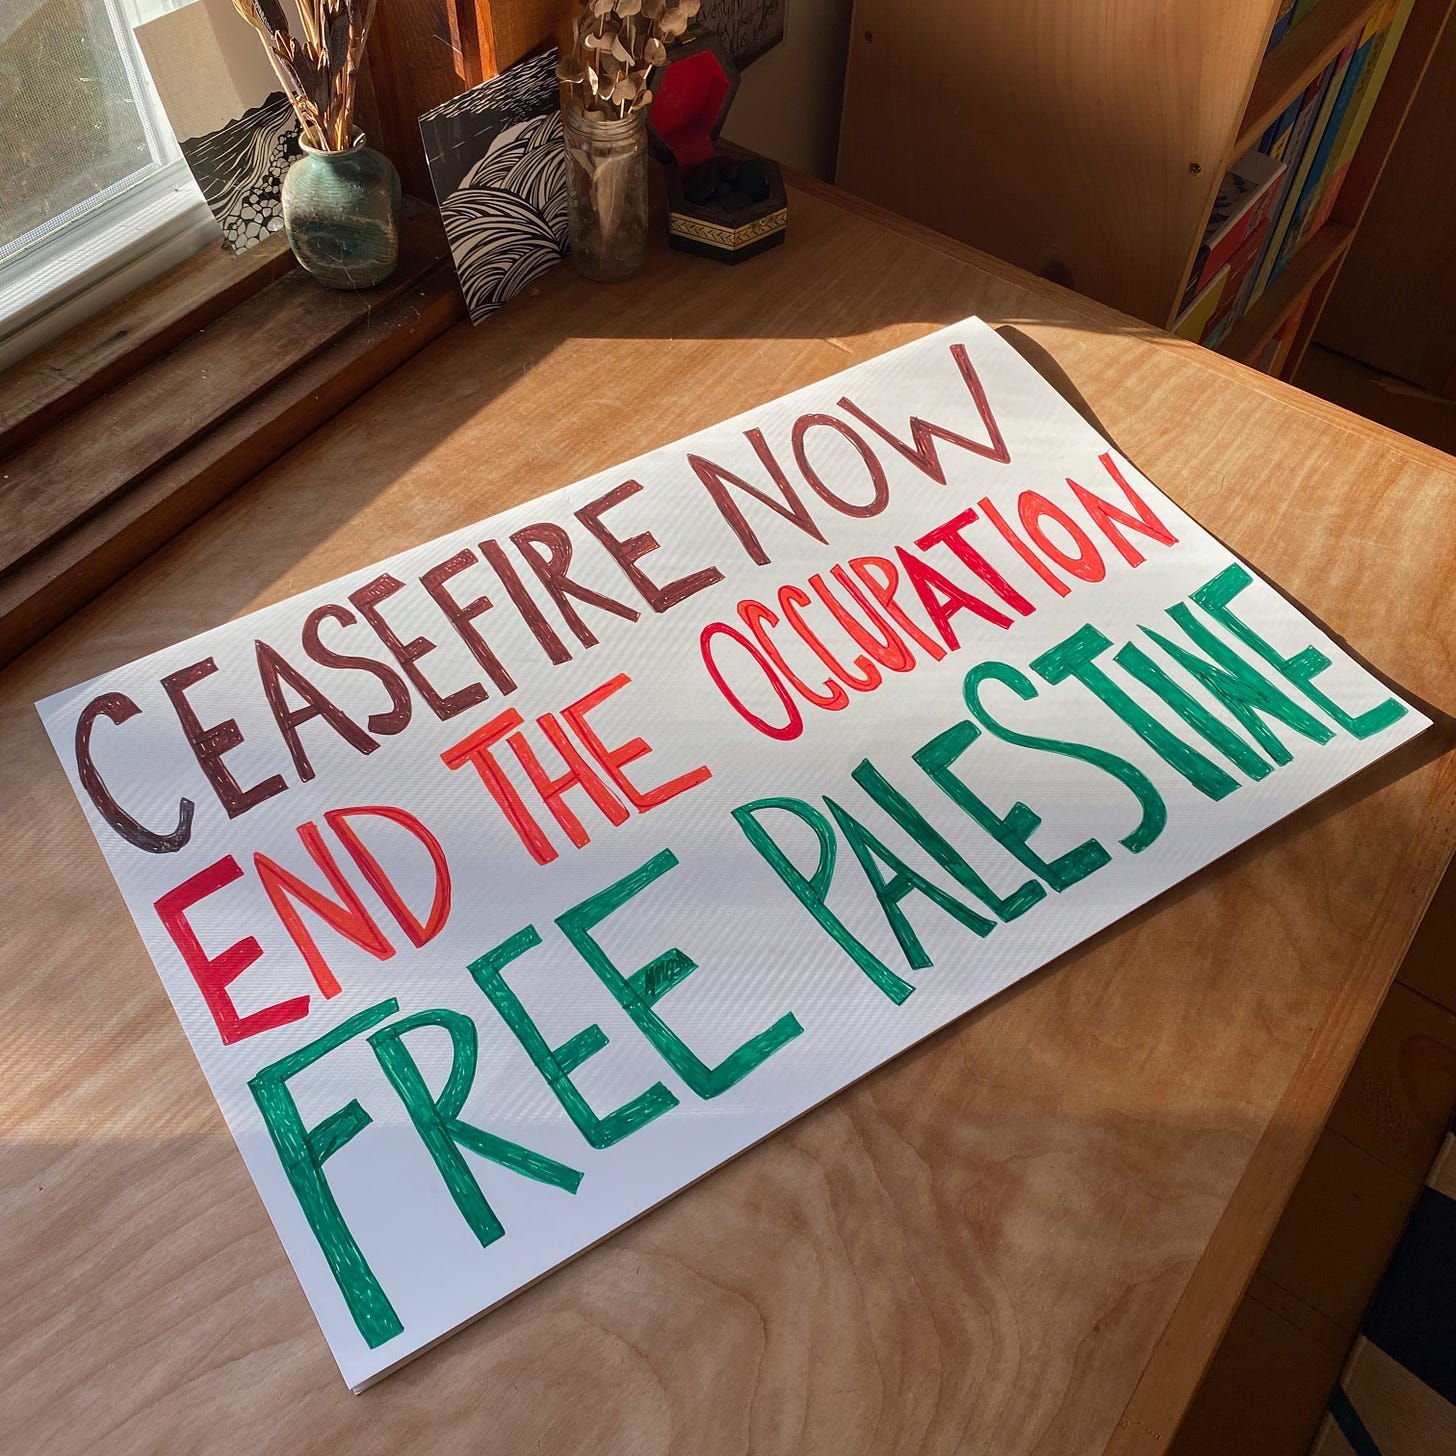 A white cardboard sign that says ‘CEASEFIRE NOW. END THE OCCUPATION. FREE PALESTINE.’ lies flat on a sunny wooden desk.